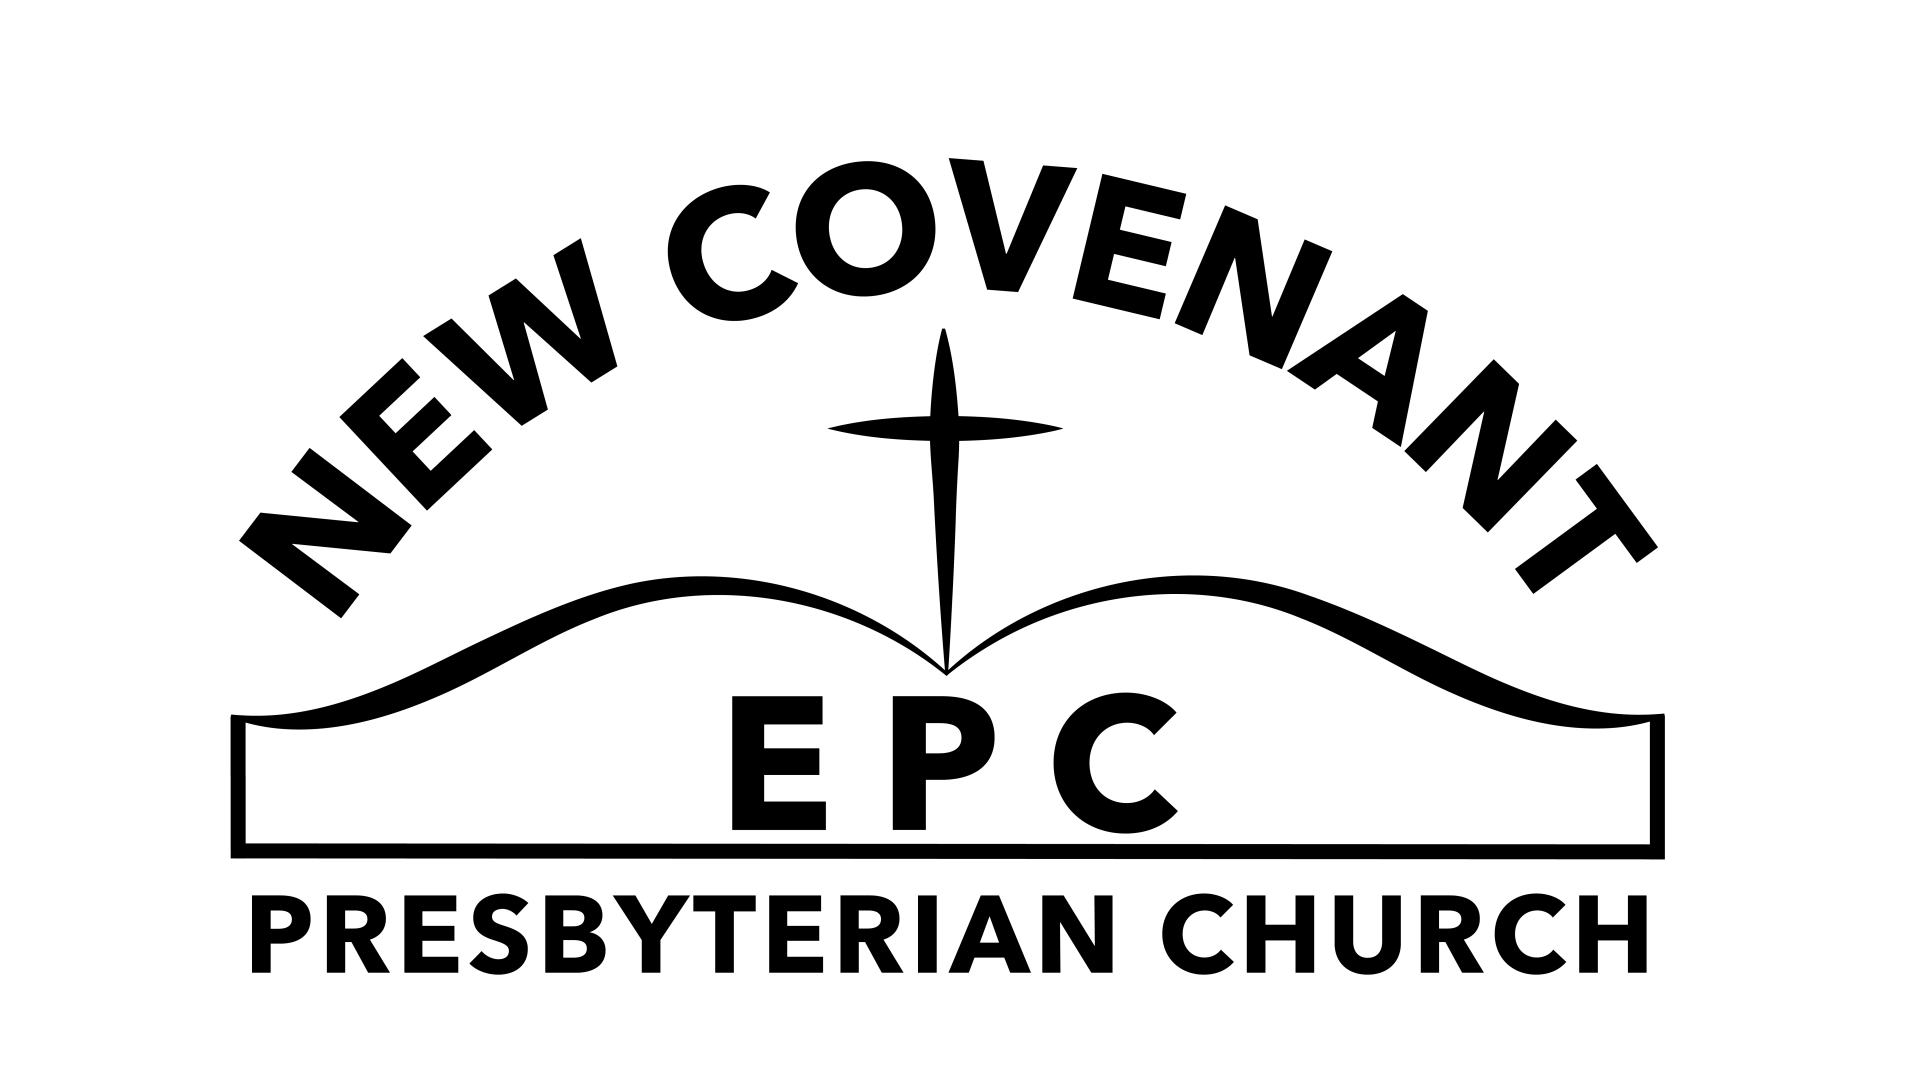 a black and white logo for the new covenant presbyterian church .